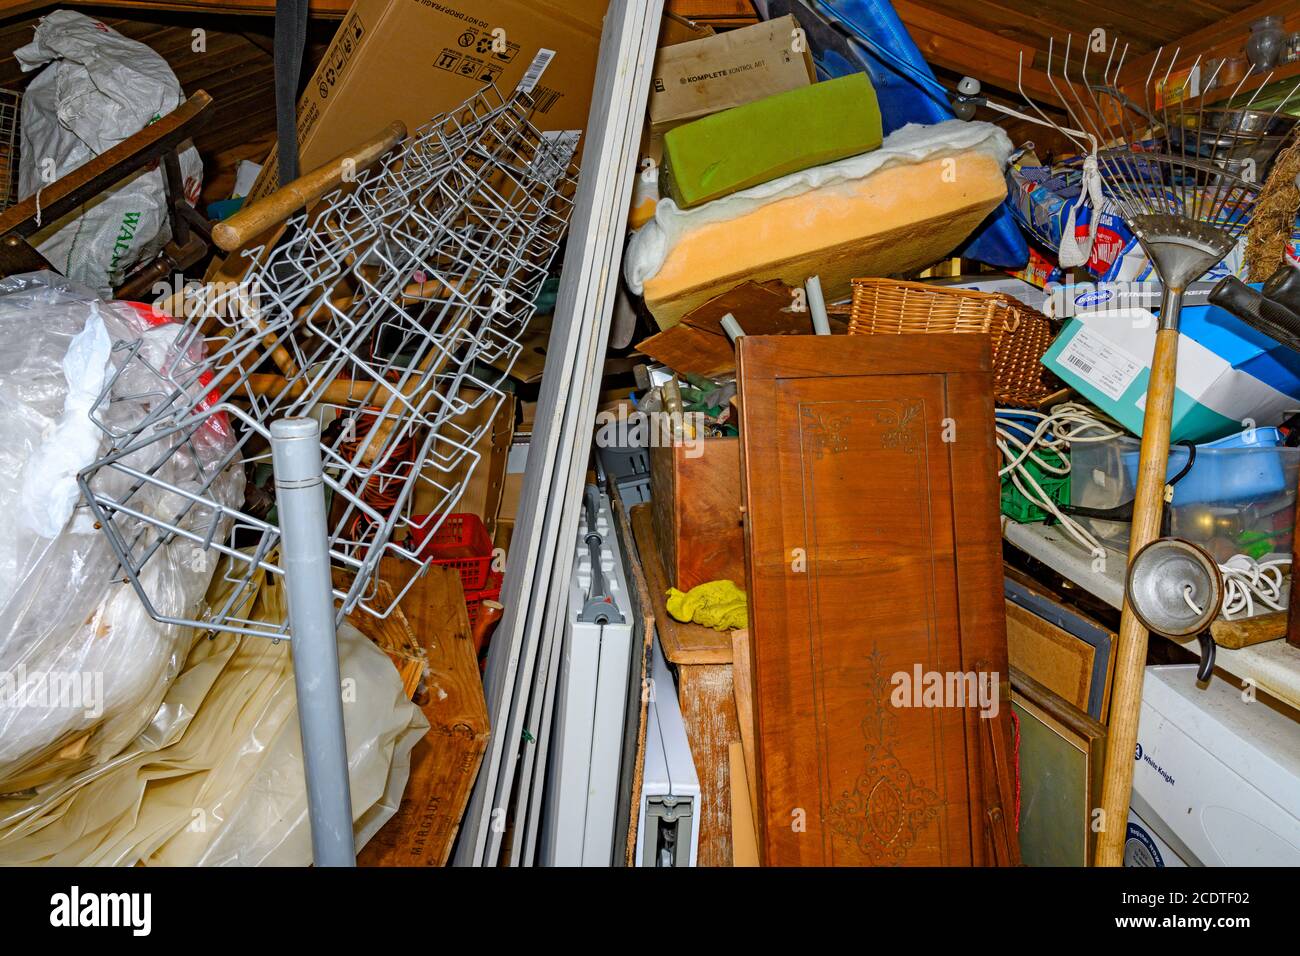 Garden shed full of household items Stock Photo